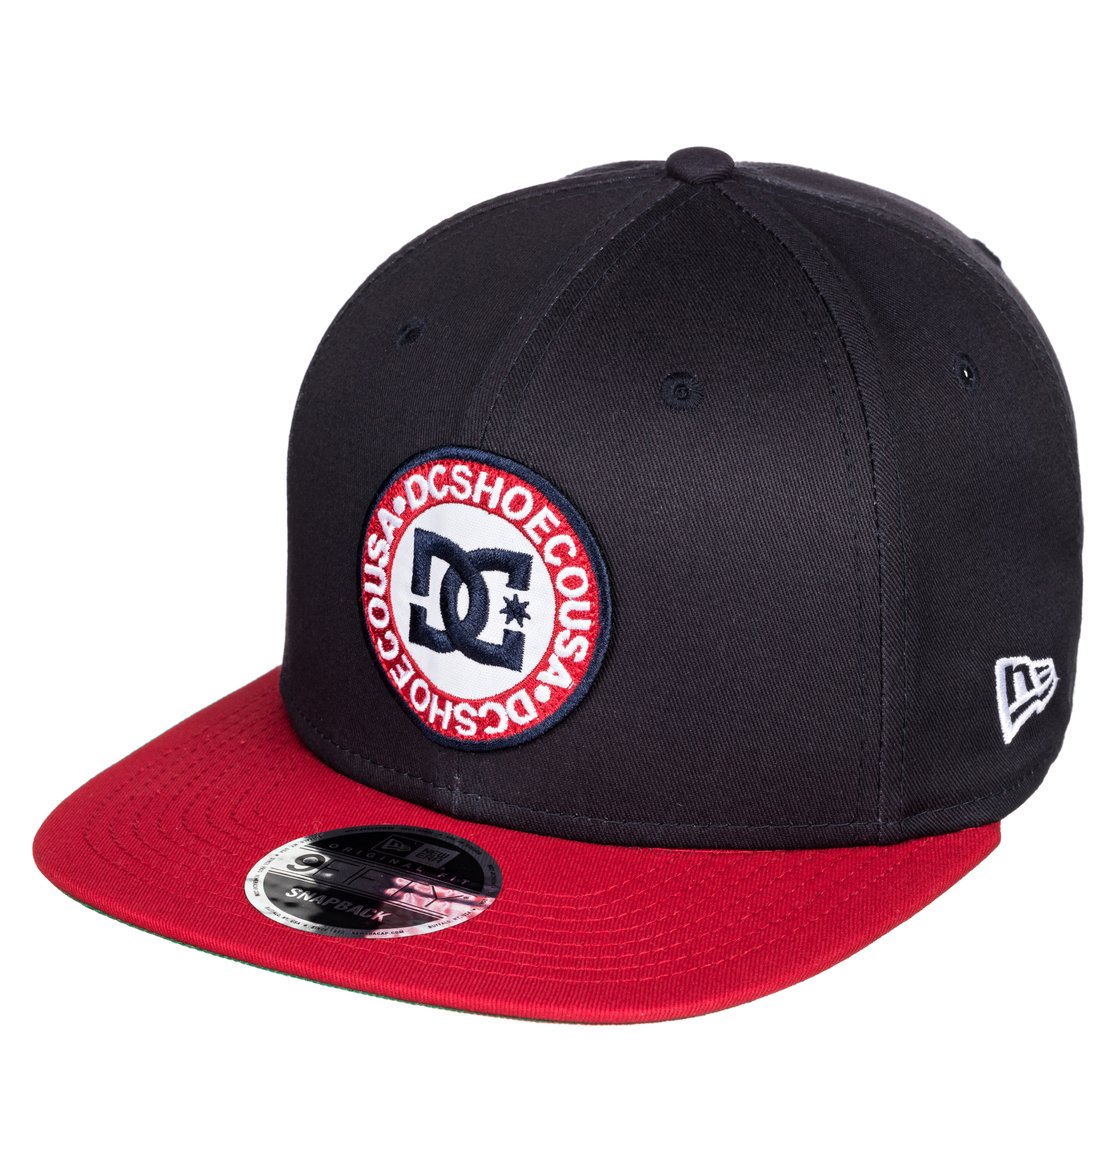 Speedeater Snapback Hat 191282316979 | DC Shoes